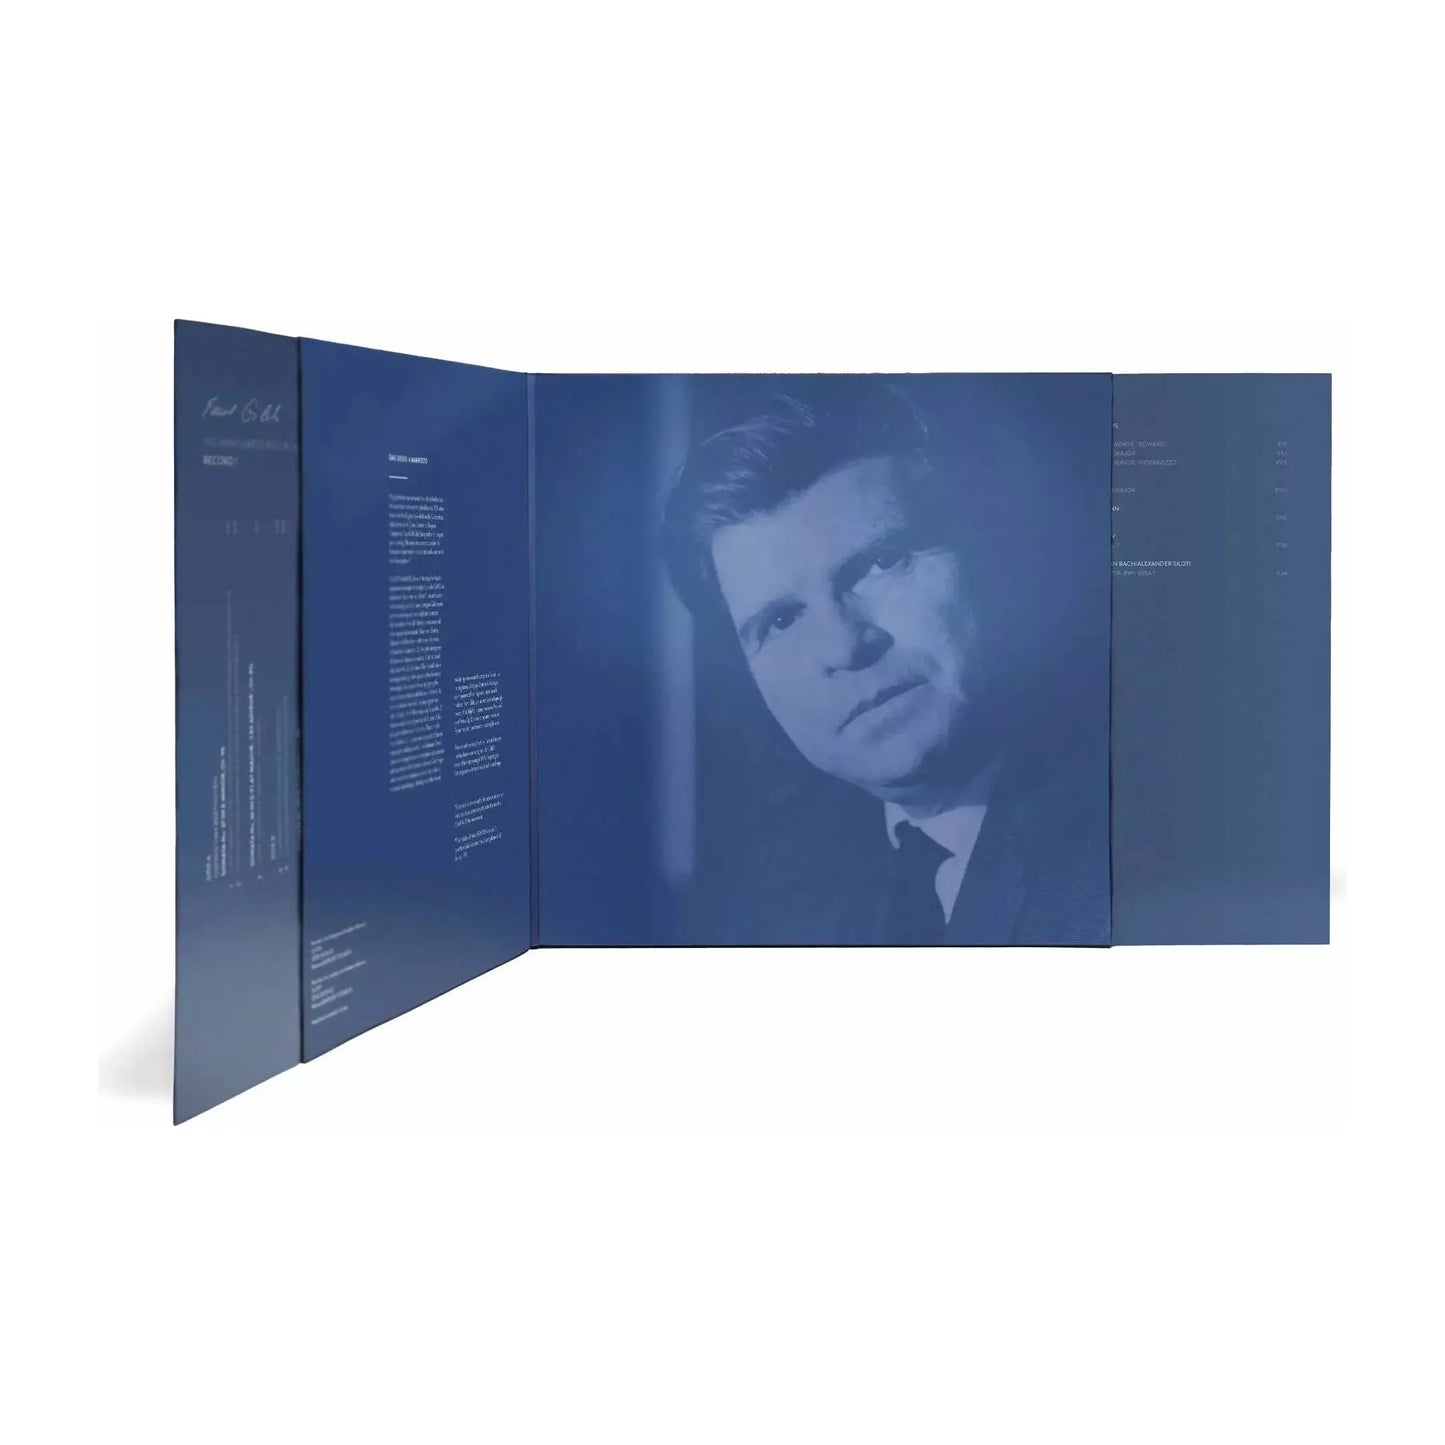 Emil Gilels - The Unreleased Concert At The Concertgebouw 1976 - The Lost Recordings LP